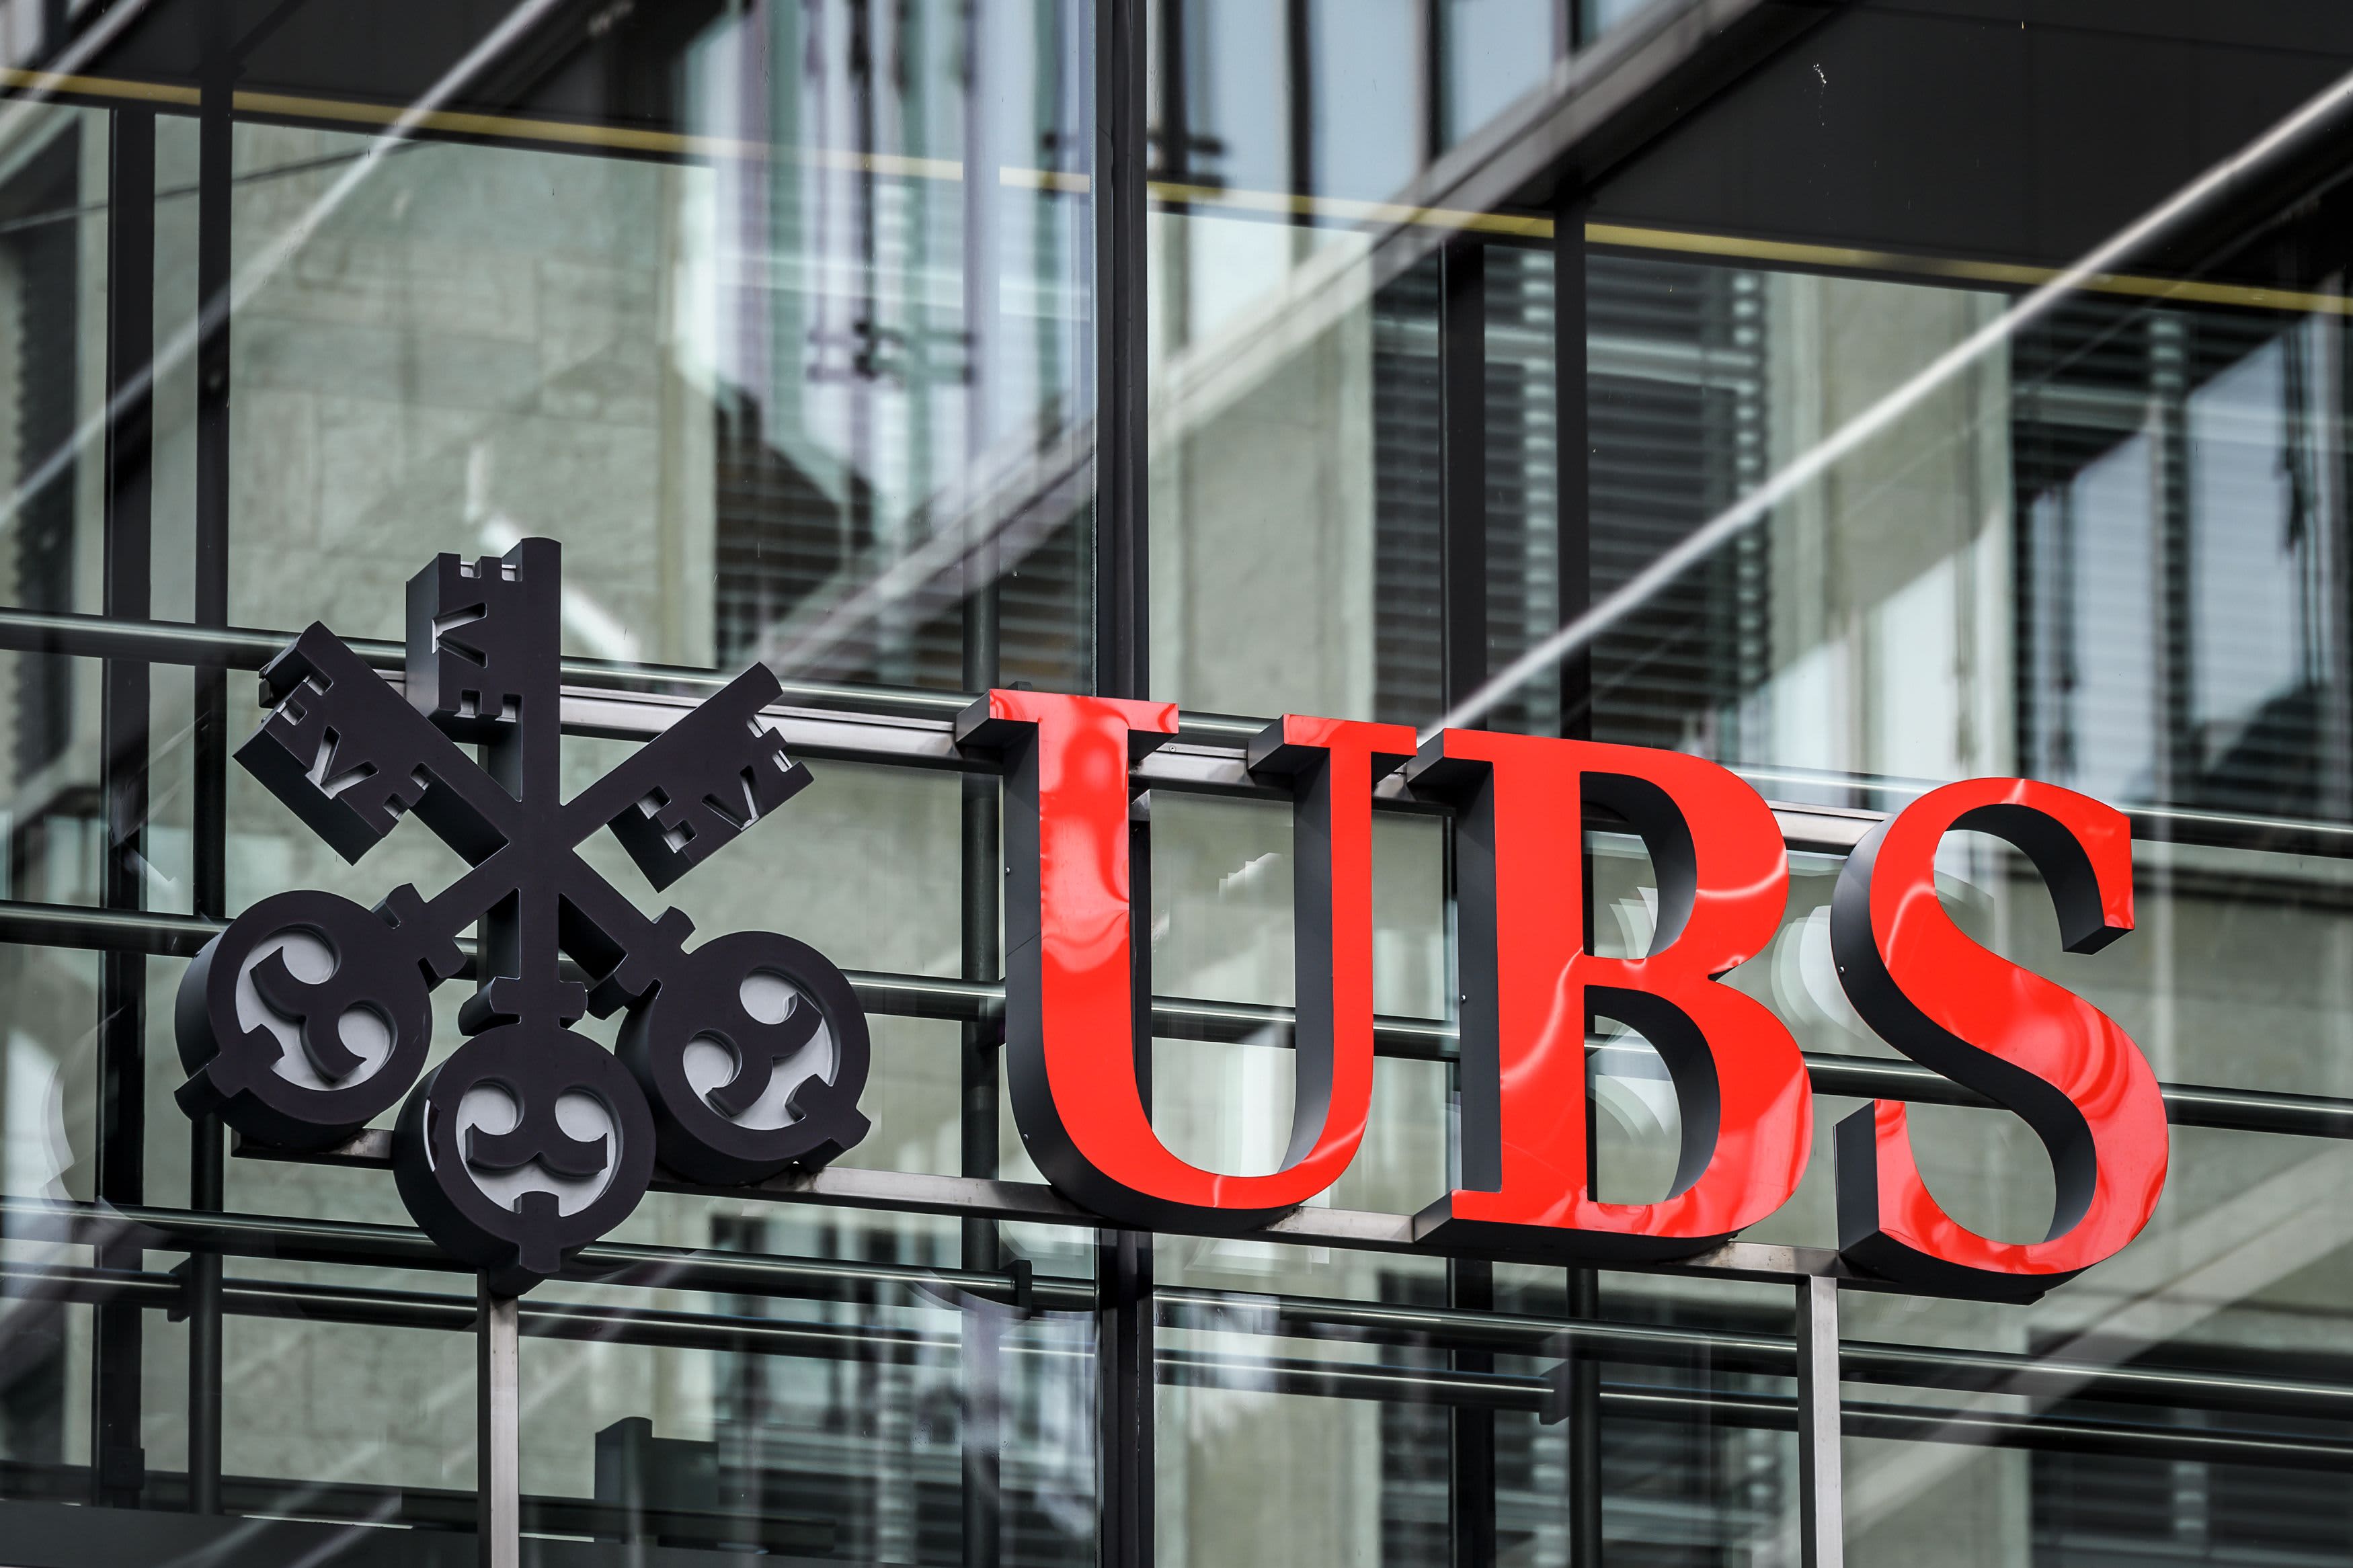 12 ubs bank policy for transactions with bitcoin